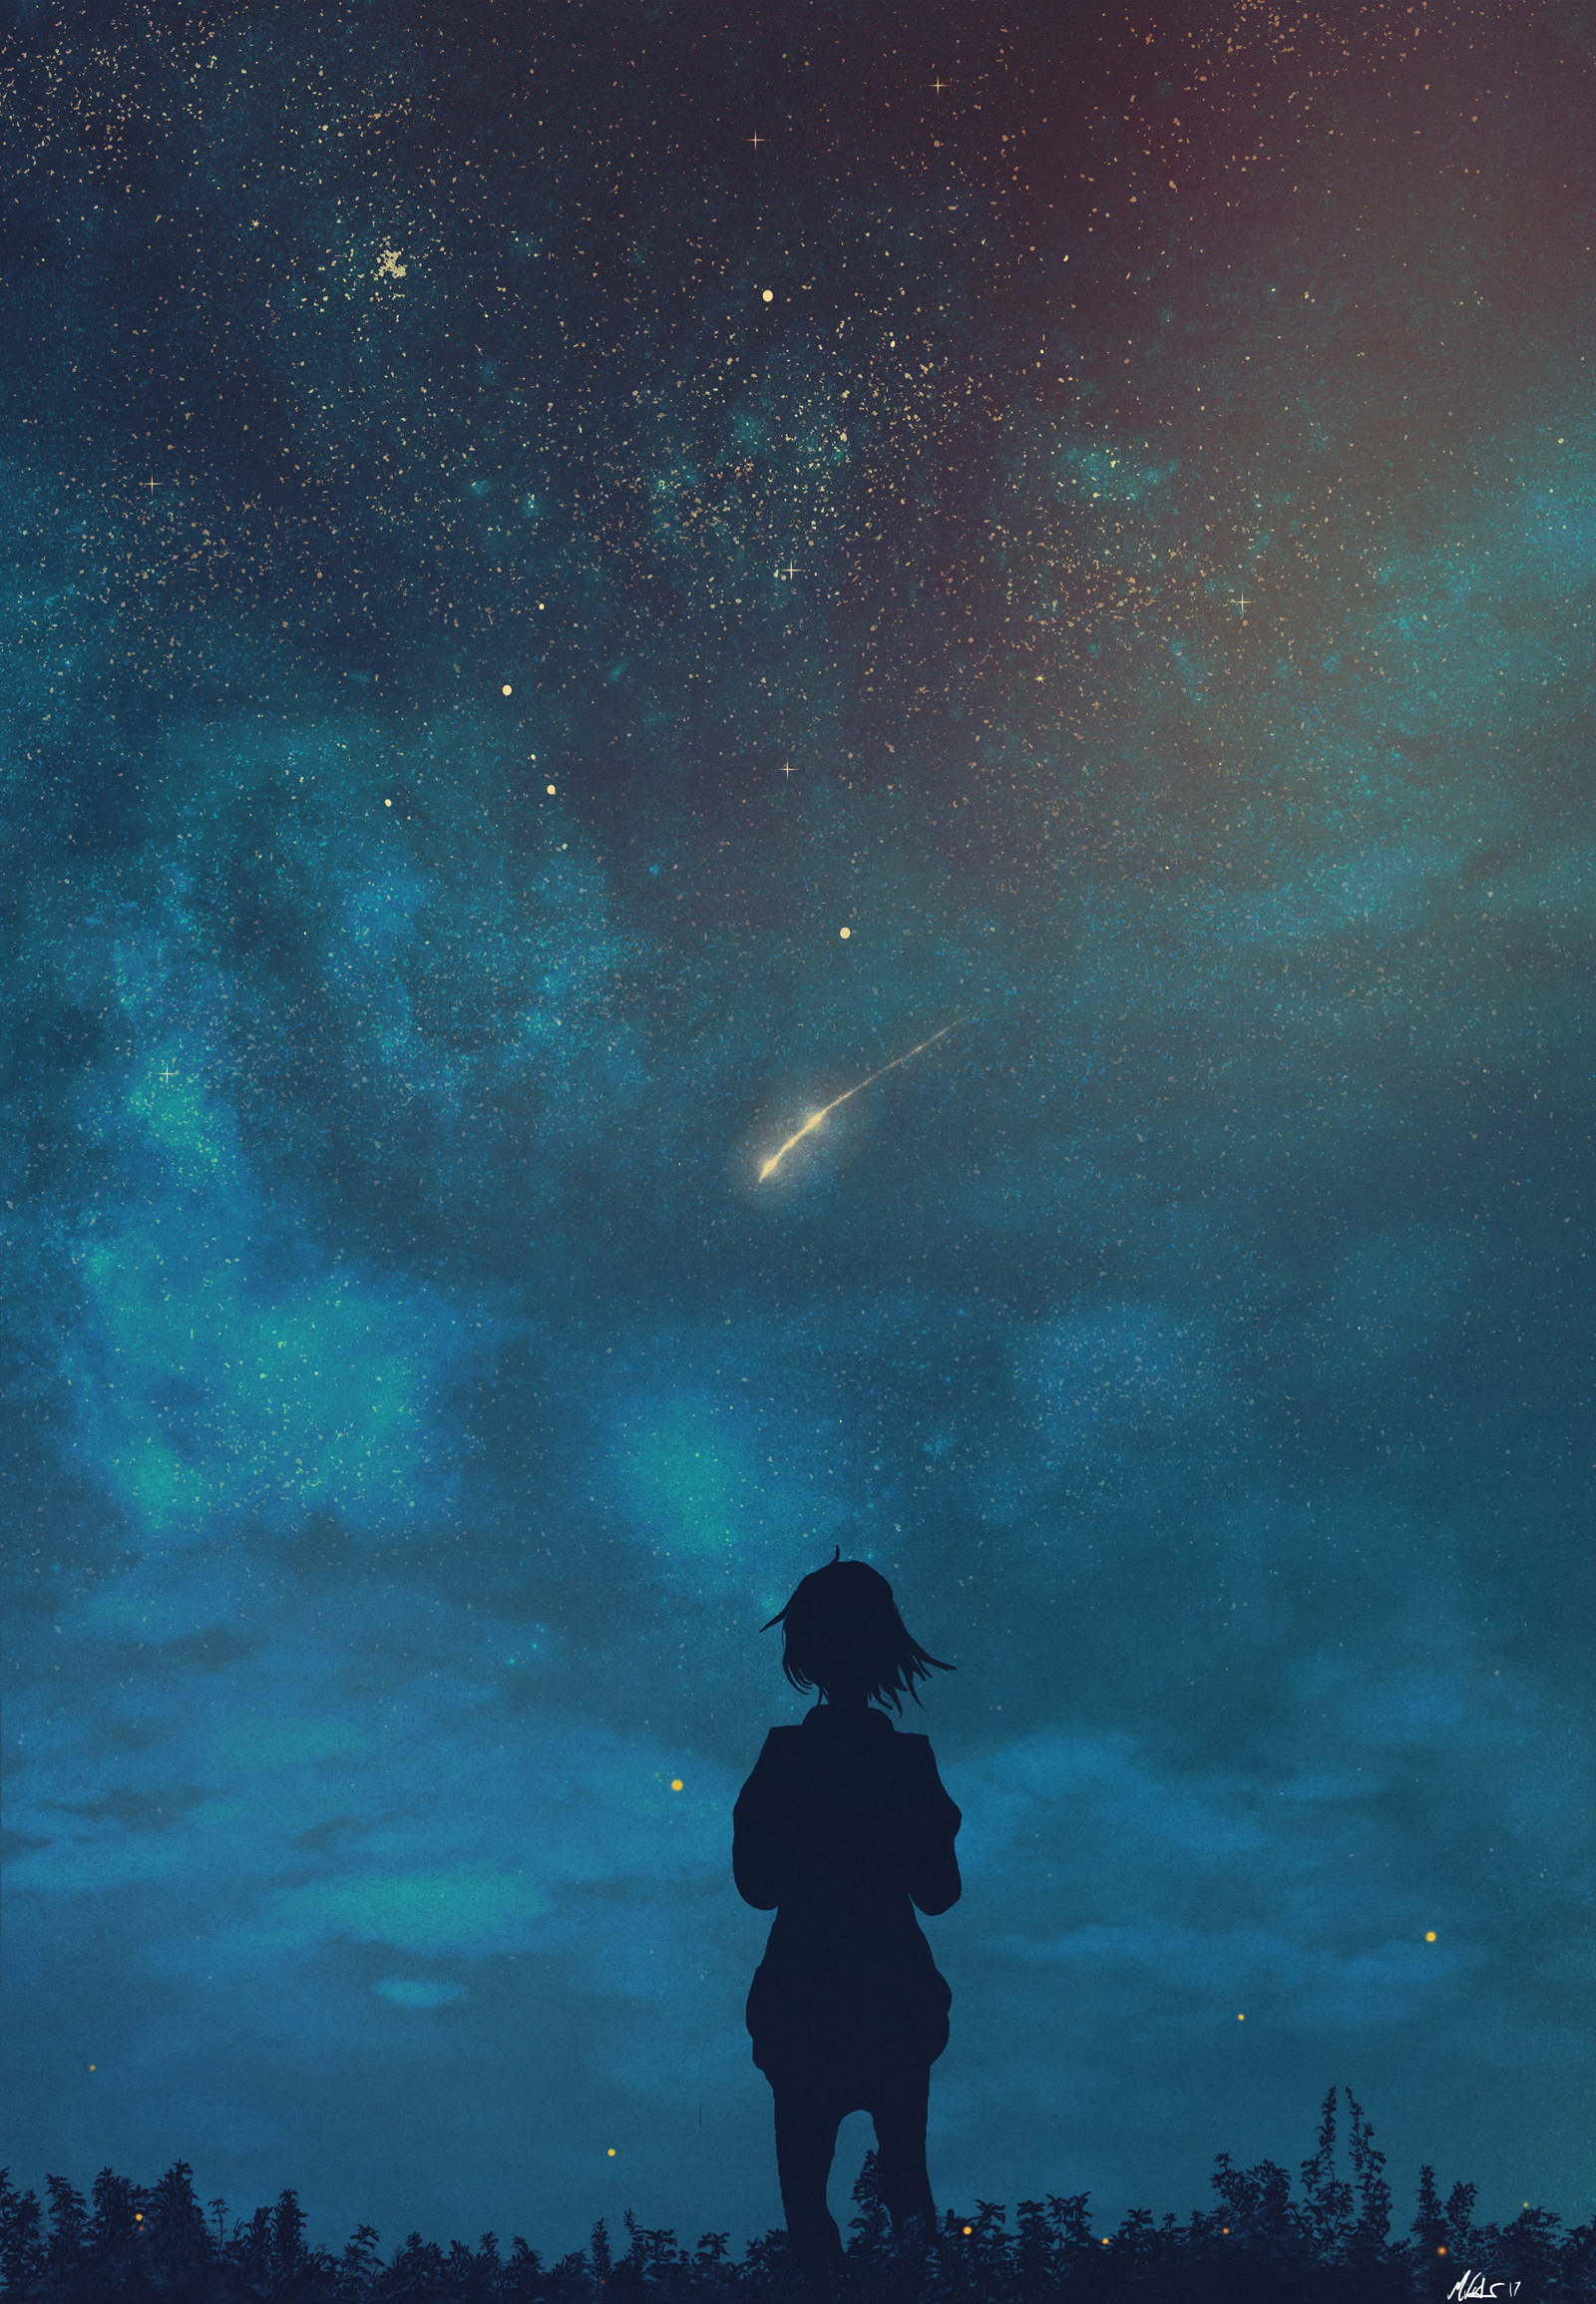 android loneliness, night, dark, silhouette, starry sky, child